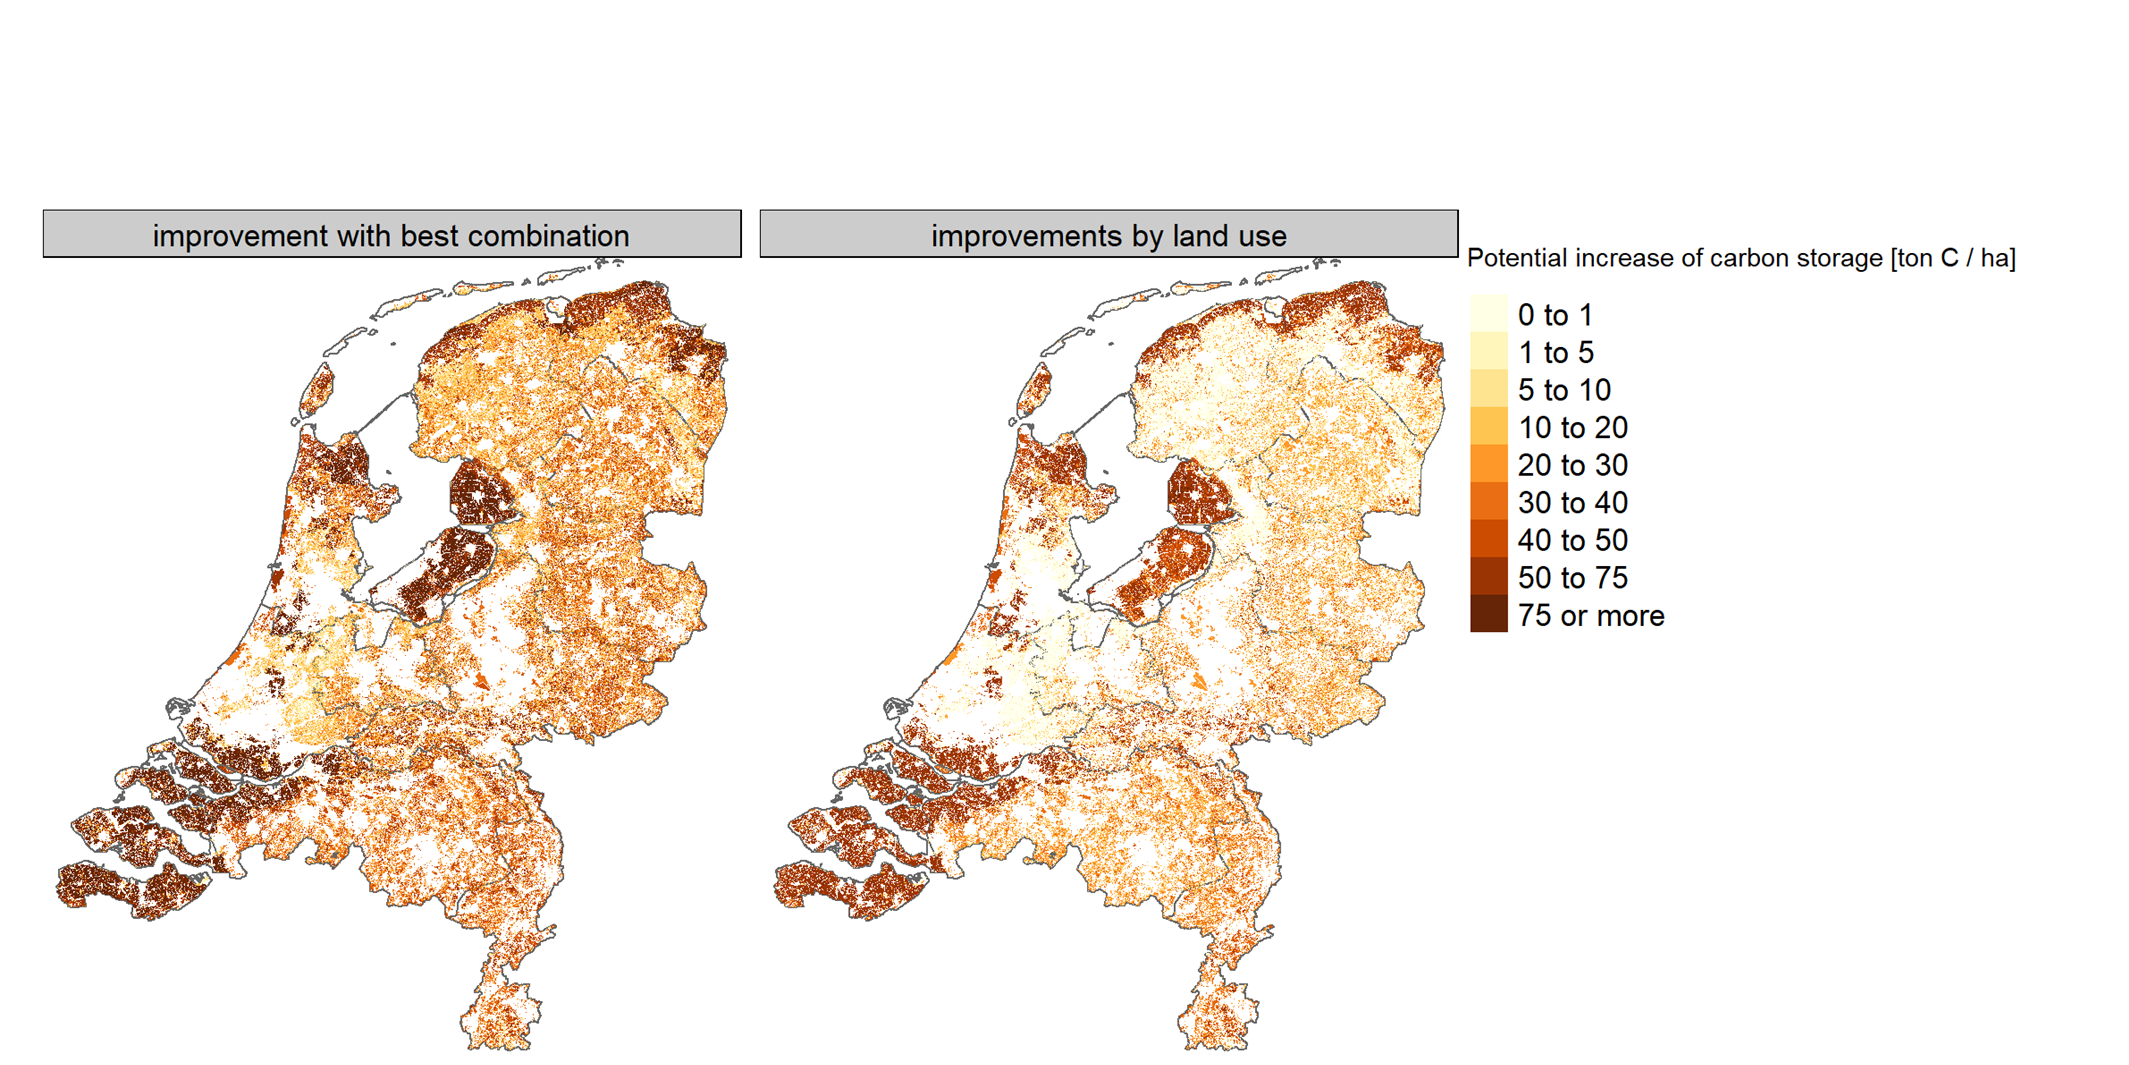 A map of carbon saturation potential for The Netherlands